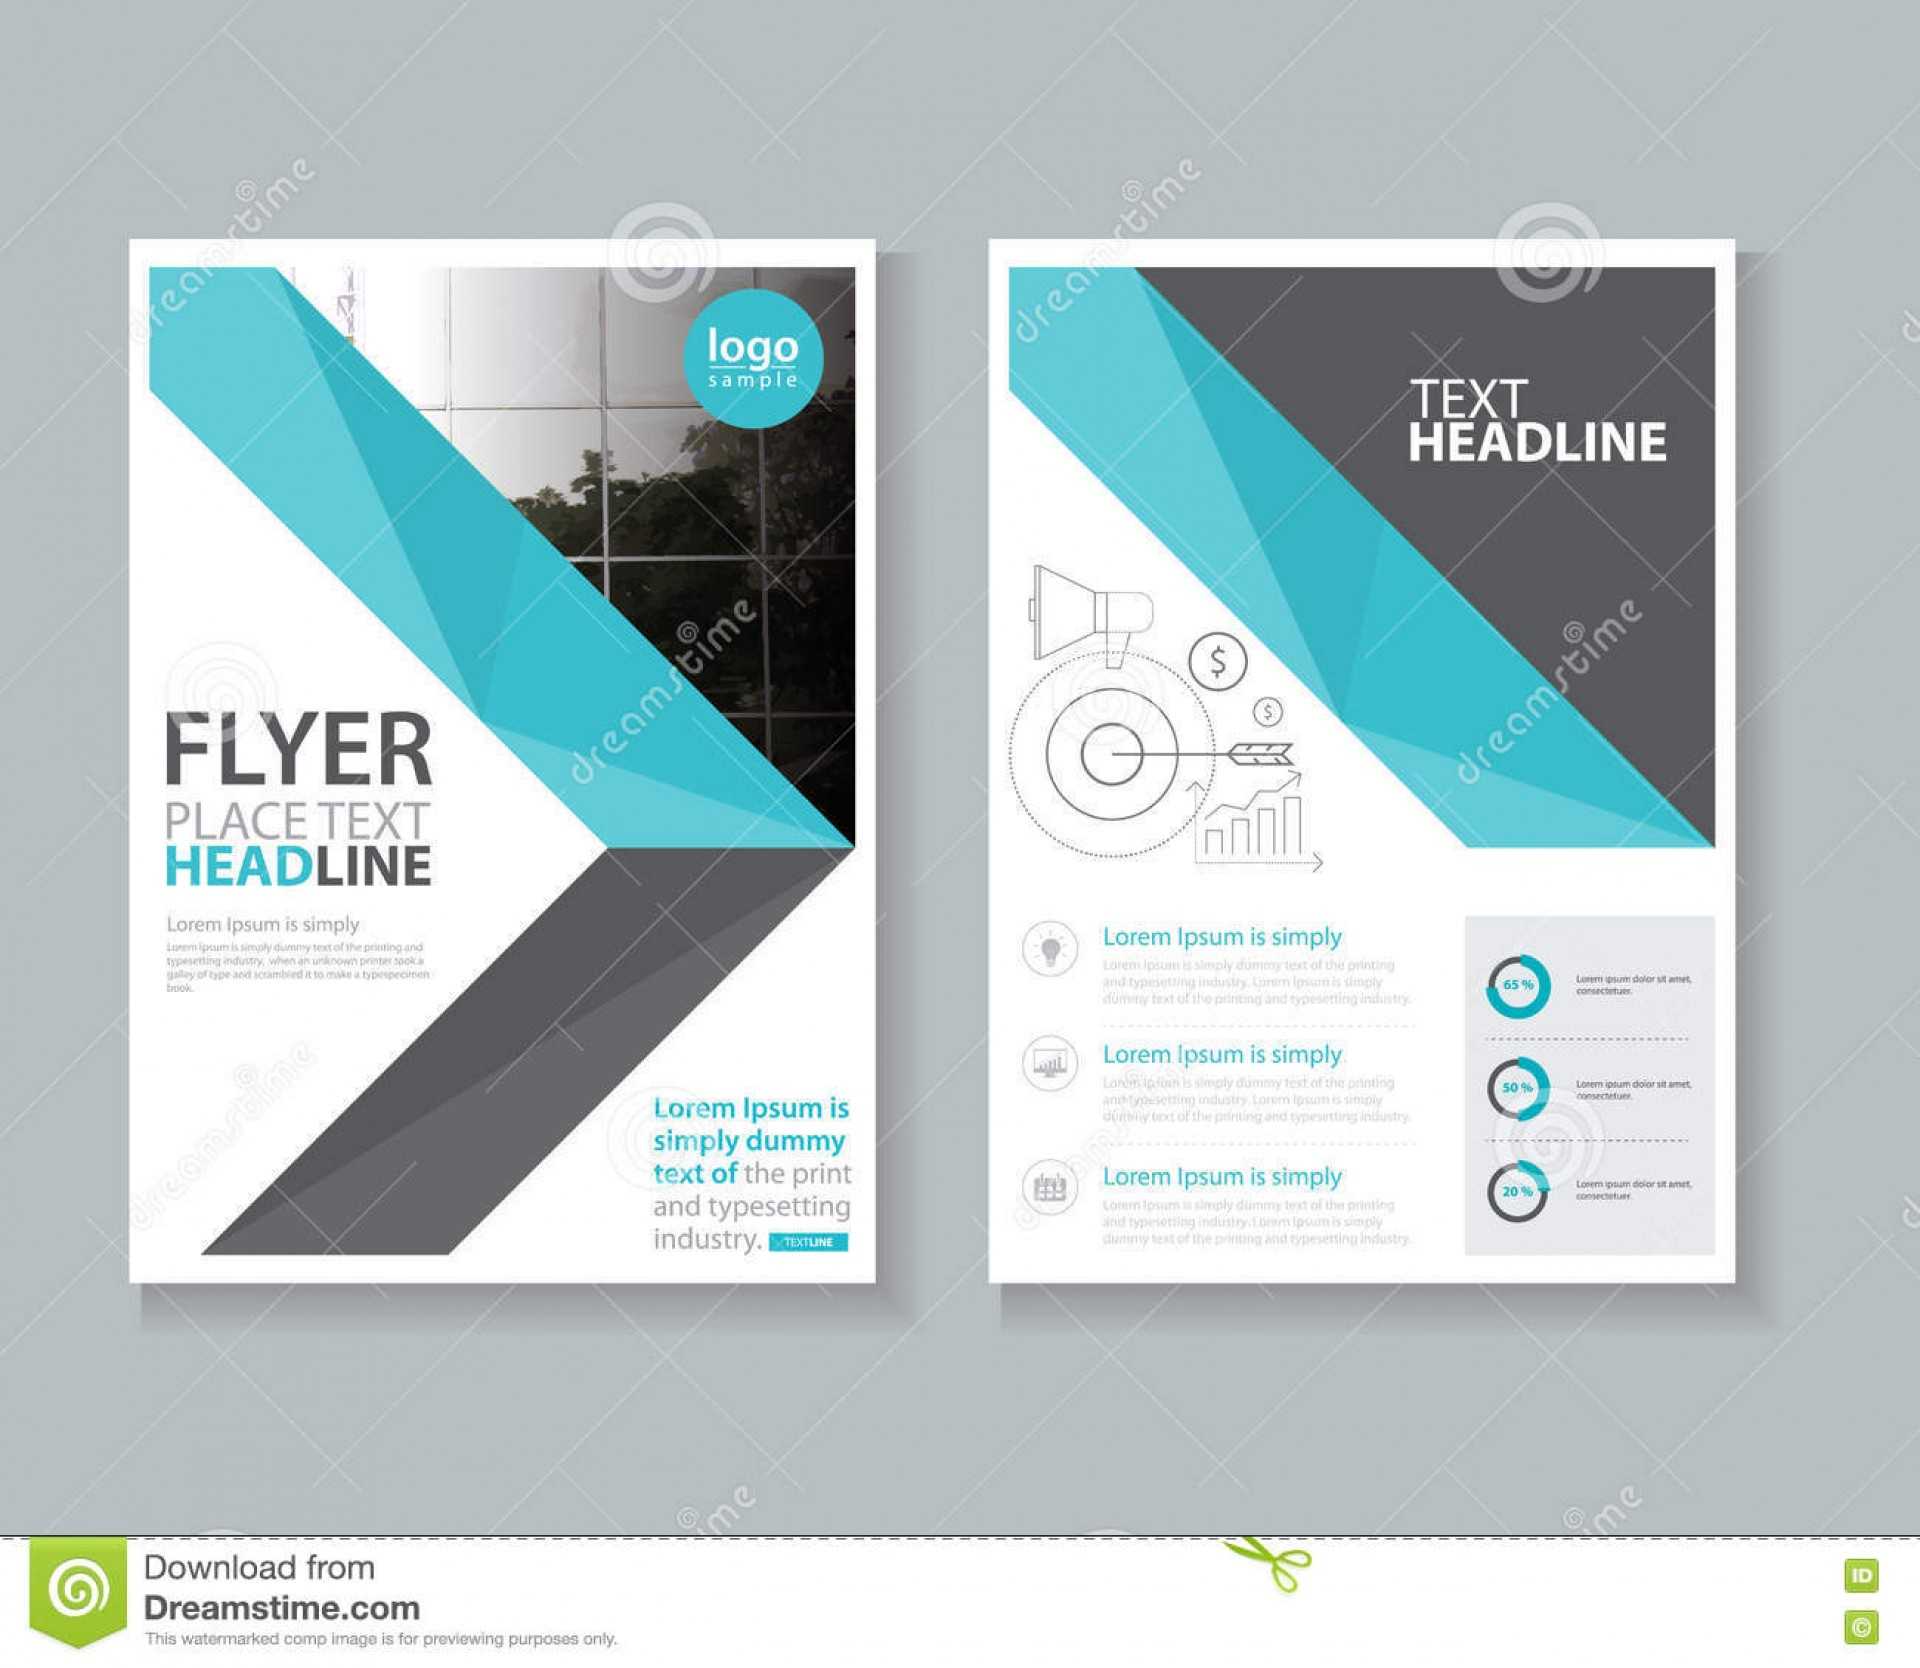 015 Word Cover Pages Template Ideas Page Brochure Flyer In Word Report Cover Page Template